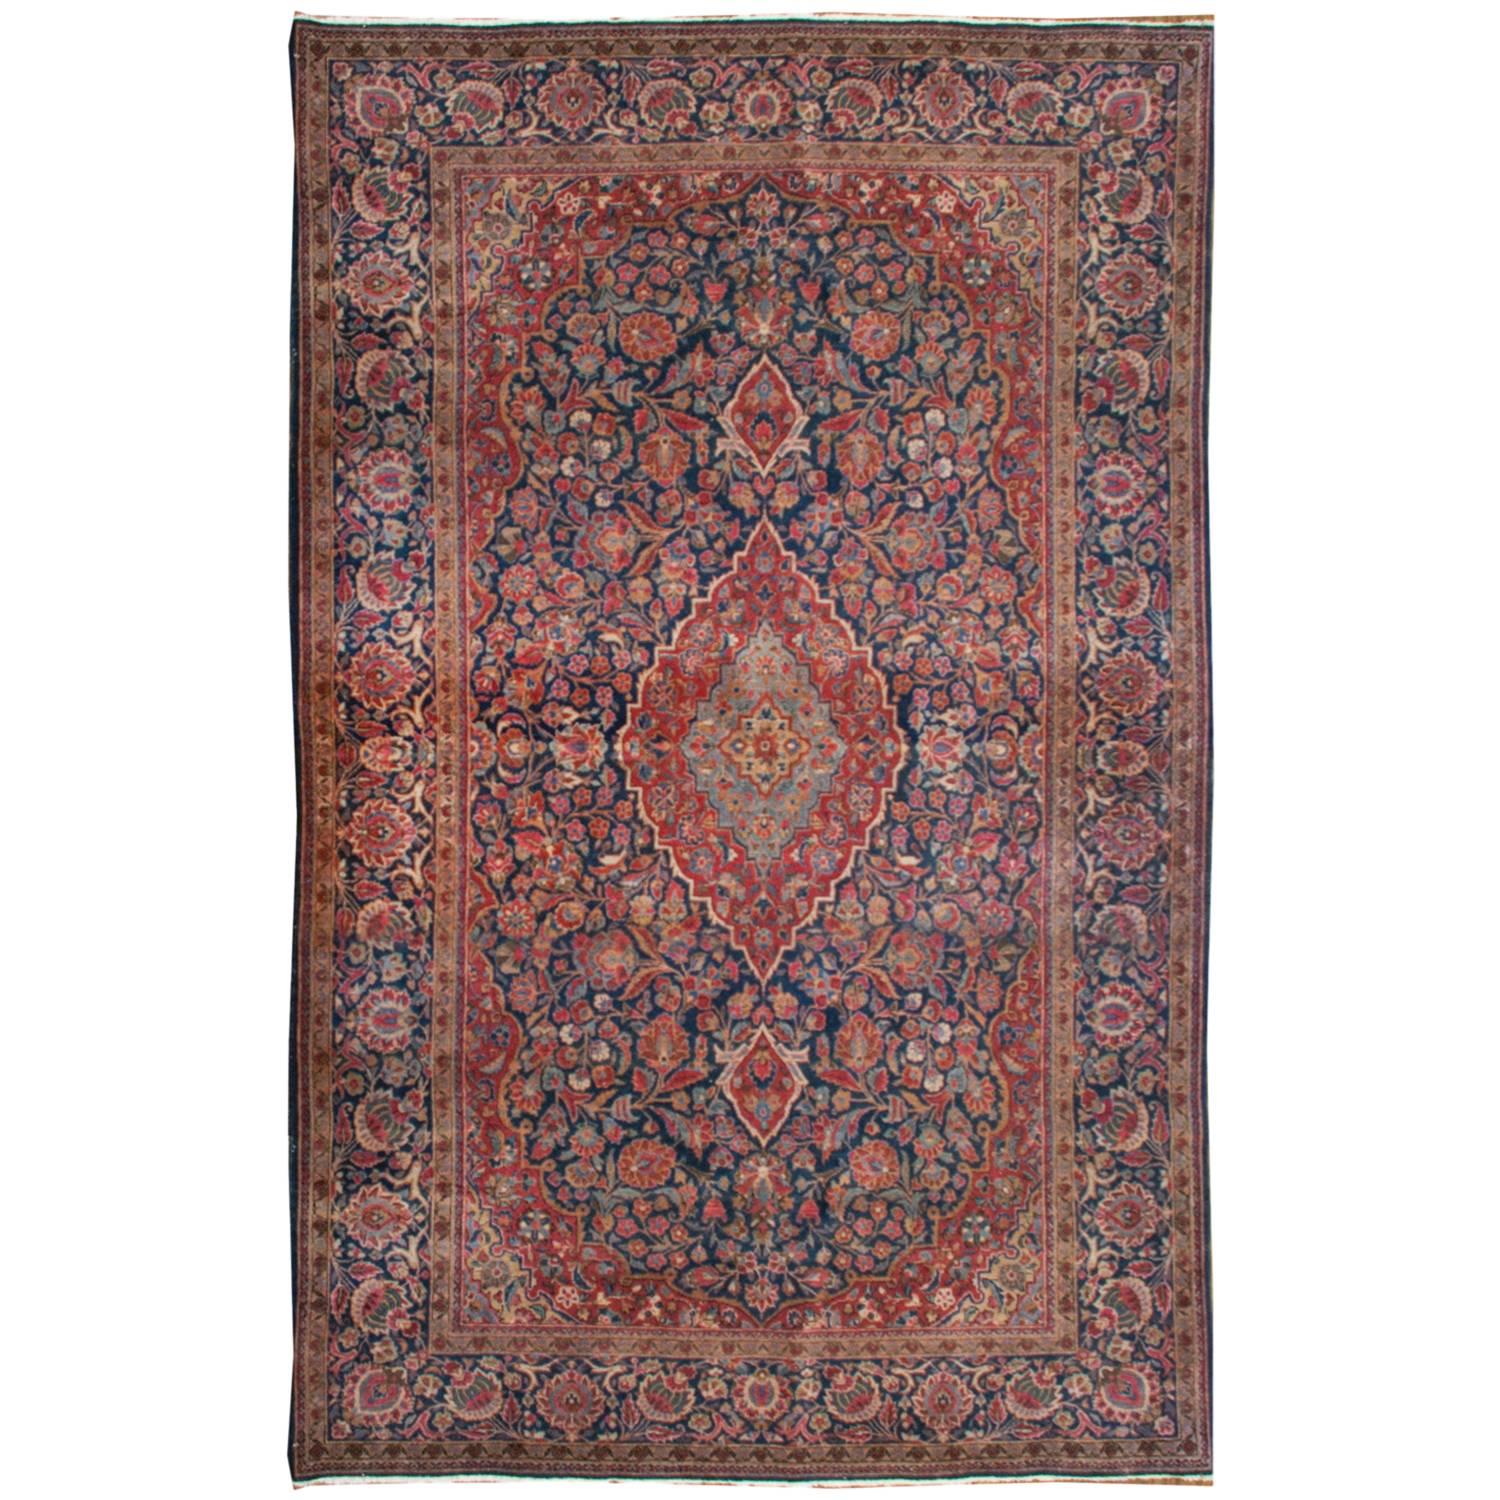 Outstanding Early 20th Century Kashan Rug